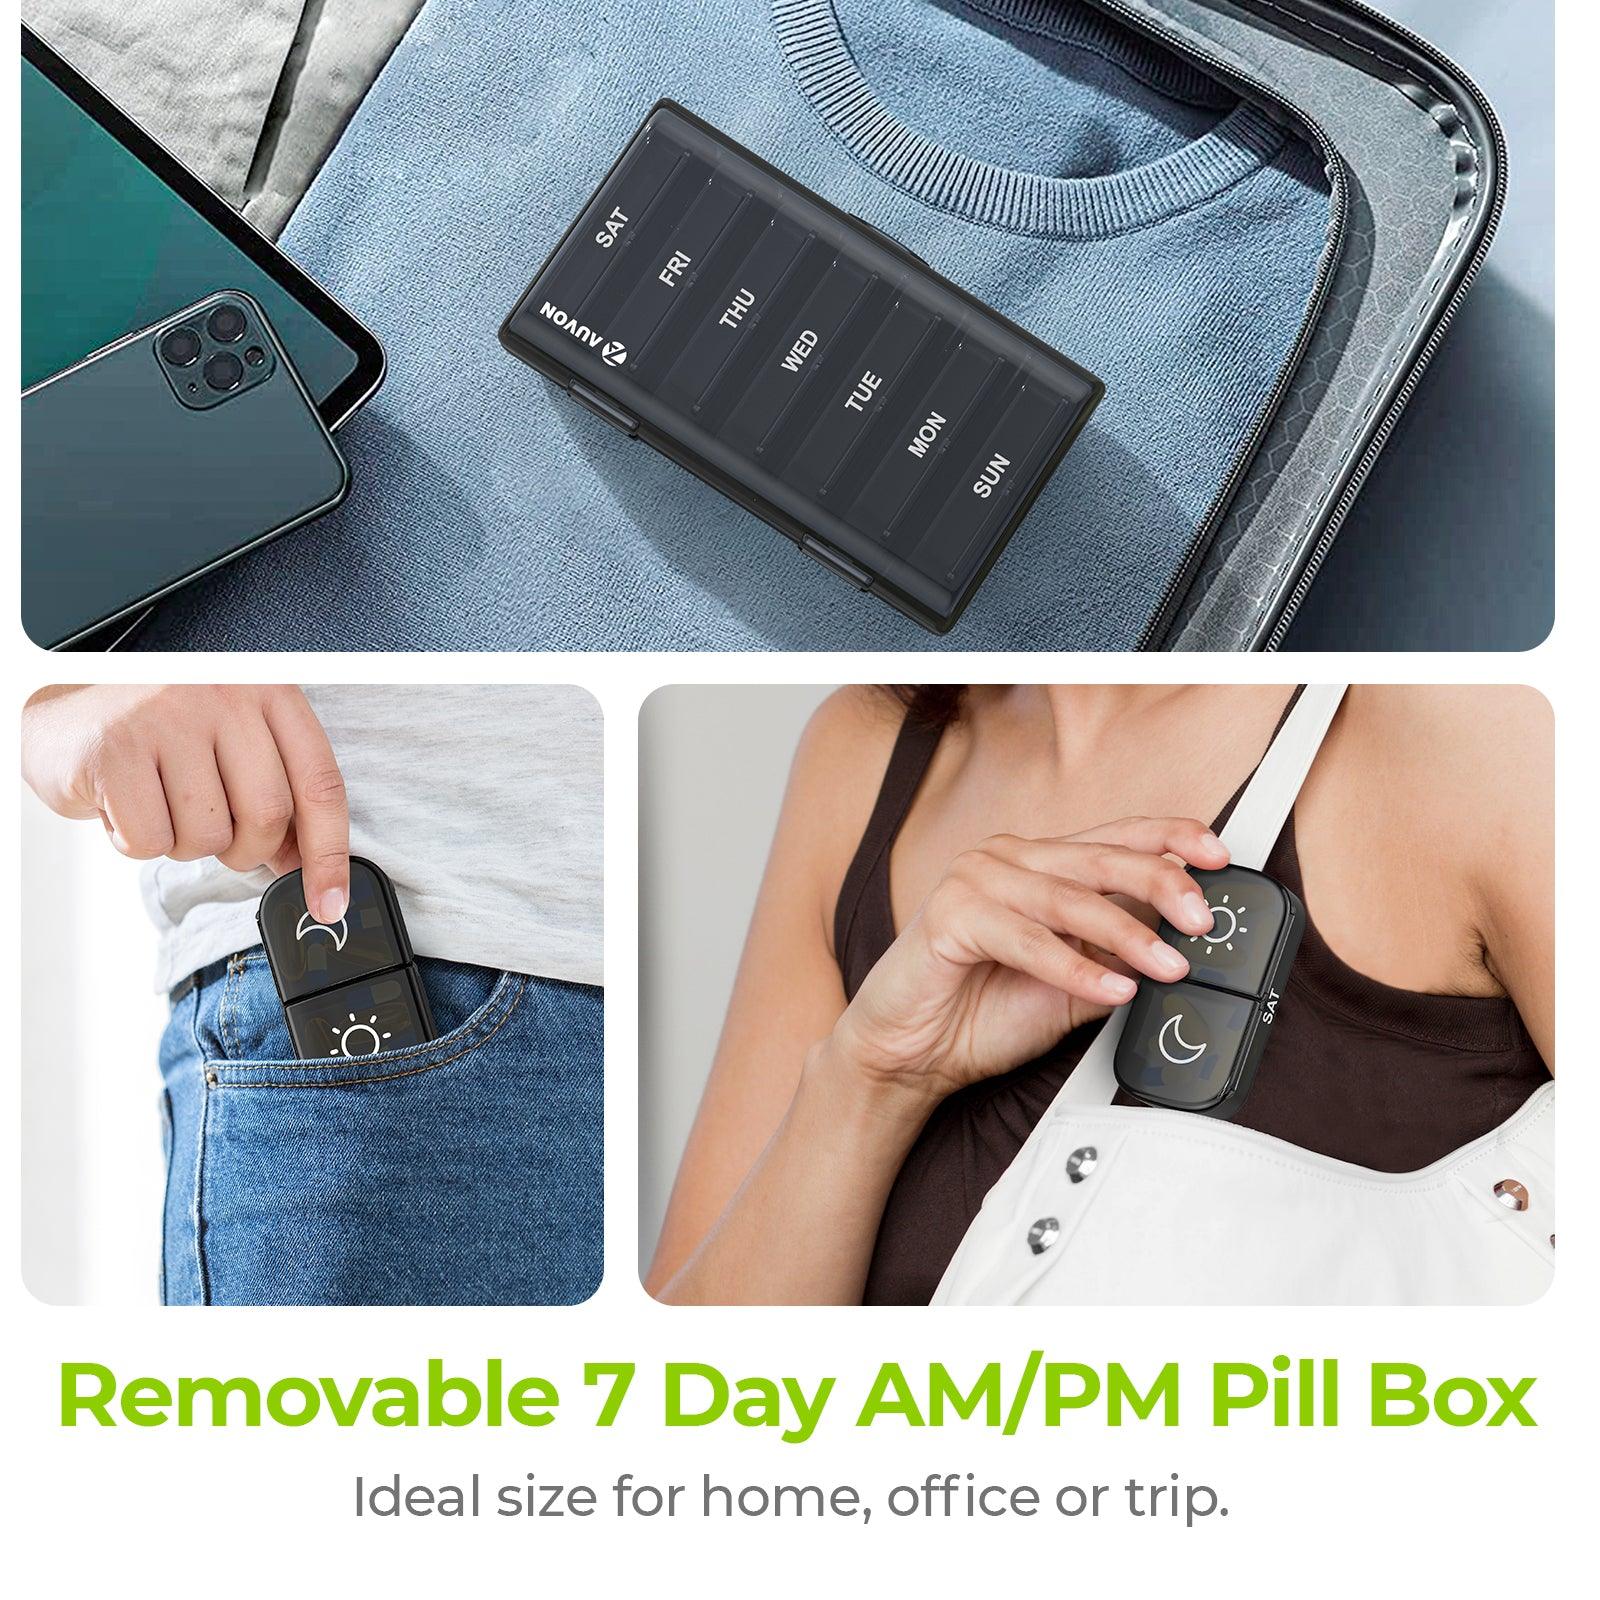 AUVON Pill Box 2 Times a Day, Weekly Pill Organizer AM PM with 7